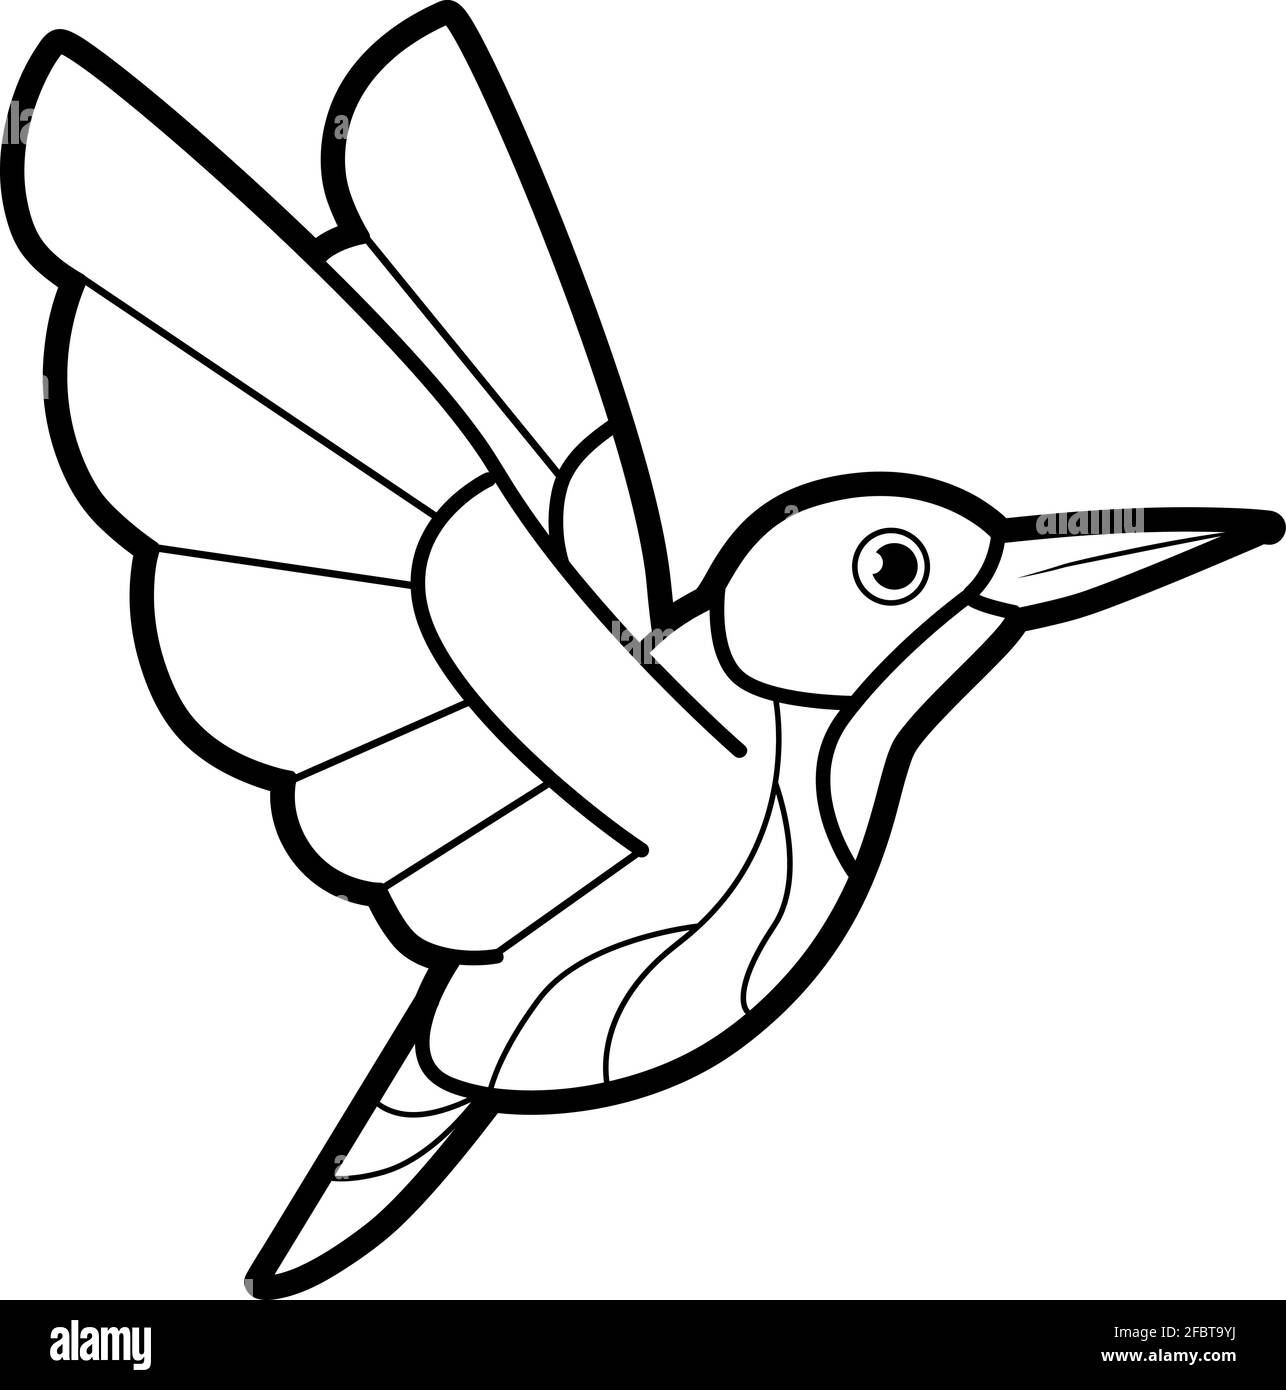 Coloring book or page for kids. bird black and white vector ...